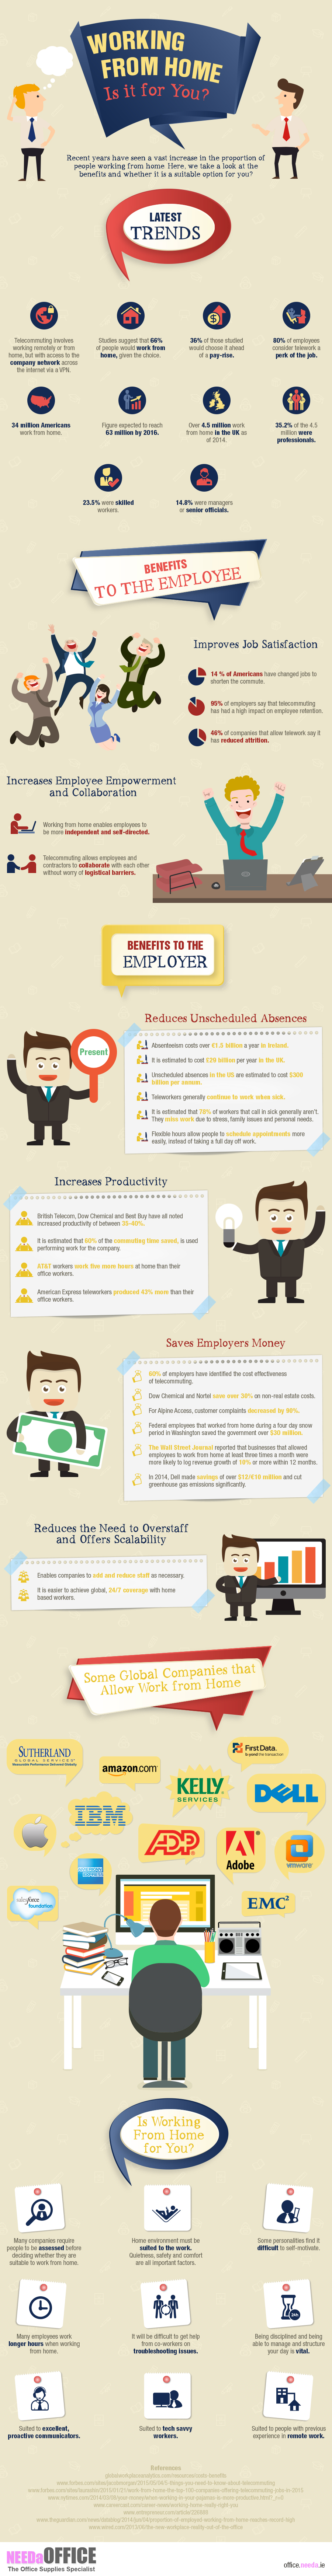 needa working from home infographic